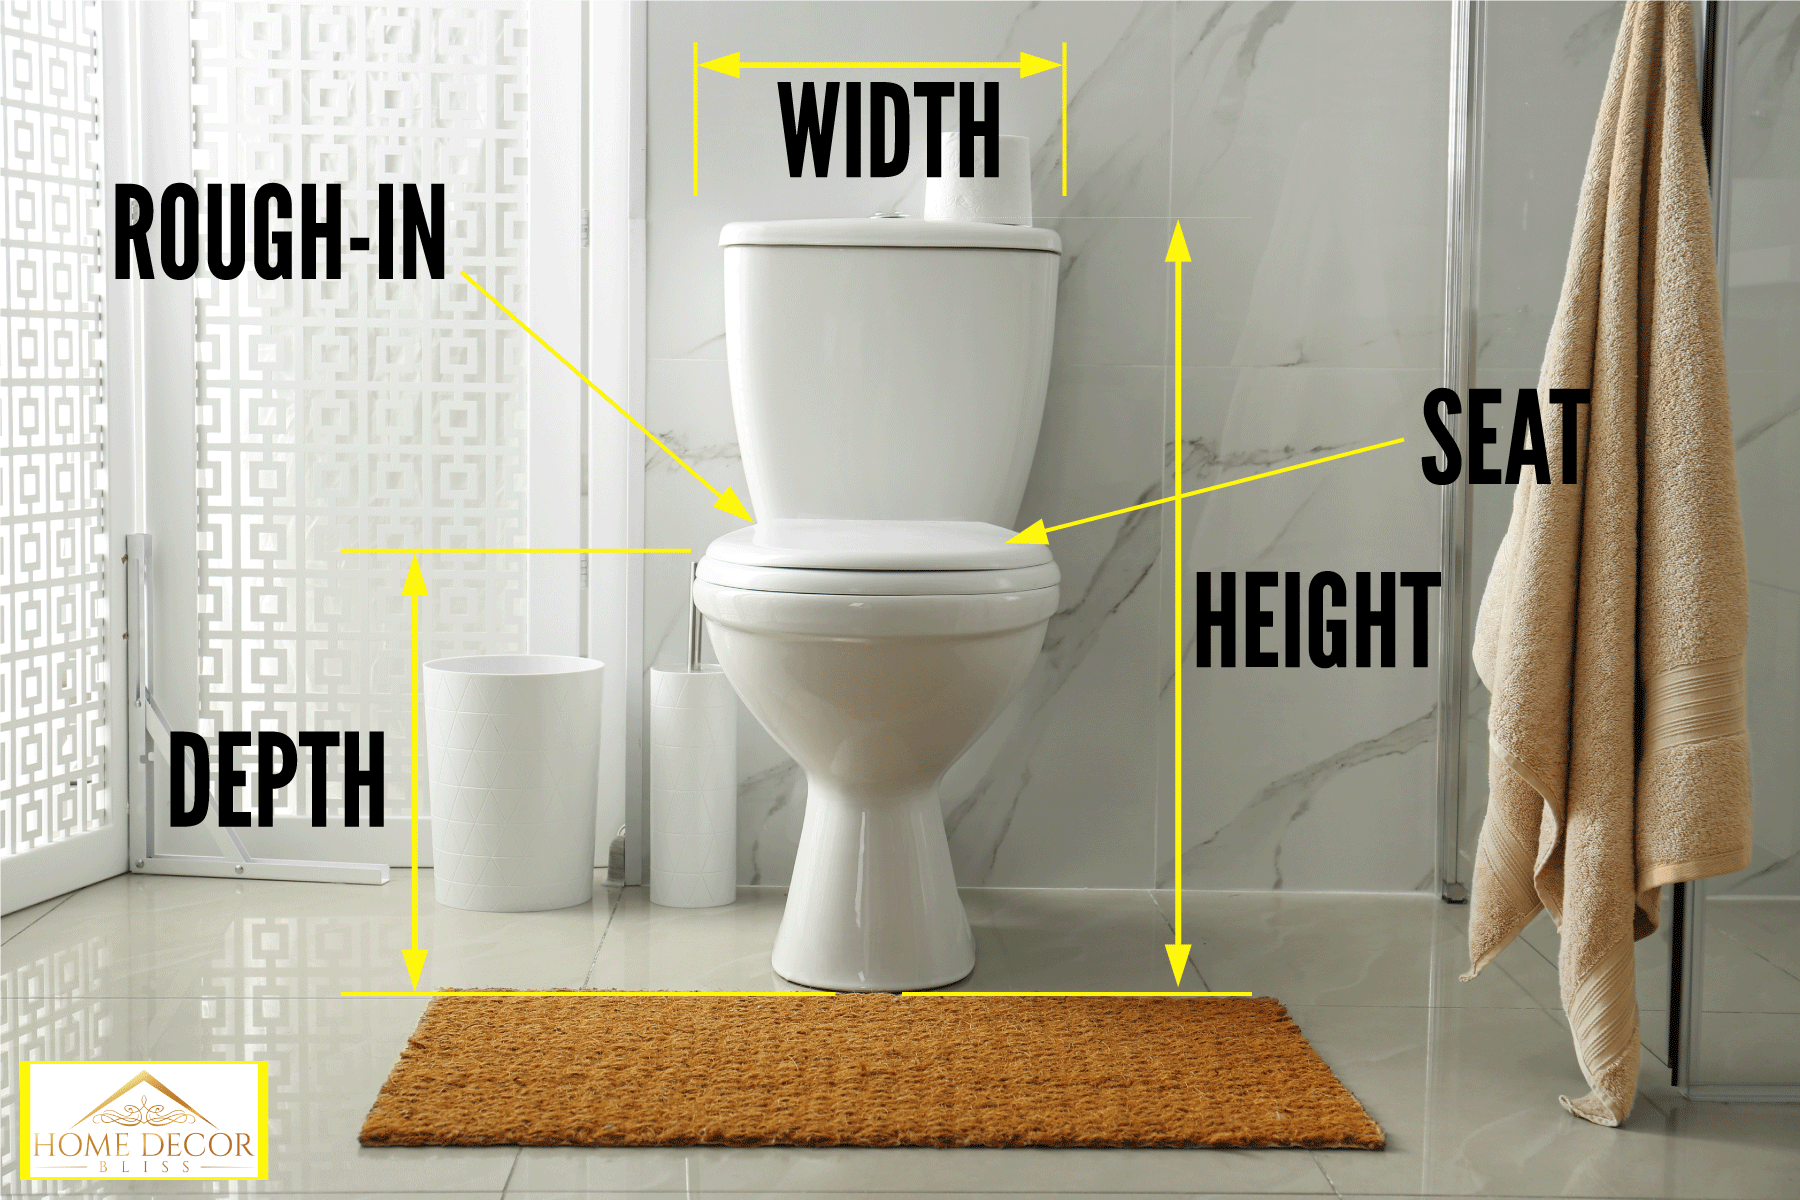 Marble tiled bathroom with a toilet and a rug on the middle, How to Measure a Toilet [Inc. Seat]